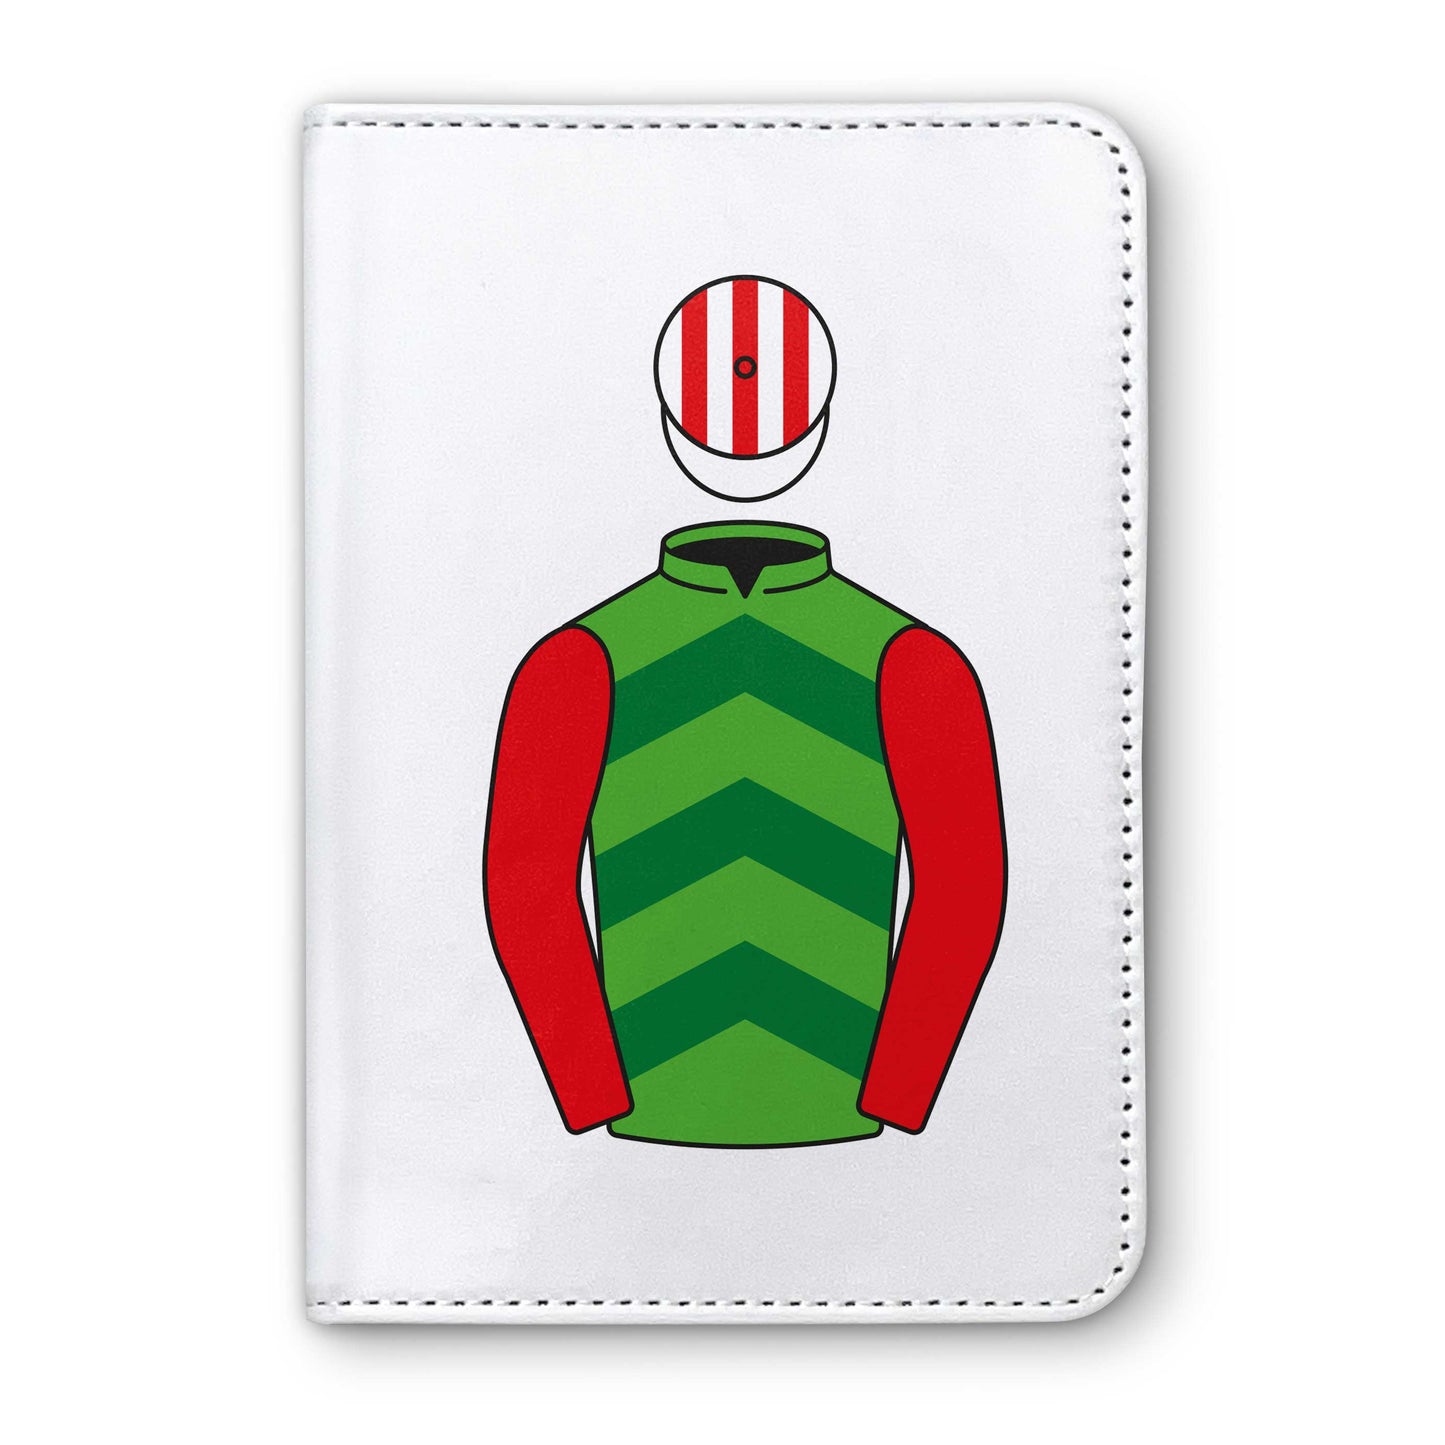 Phil And Julie Martin Horse Racing Passport Holder - Hacked Up Horse Racing Gifts